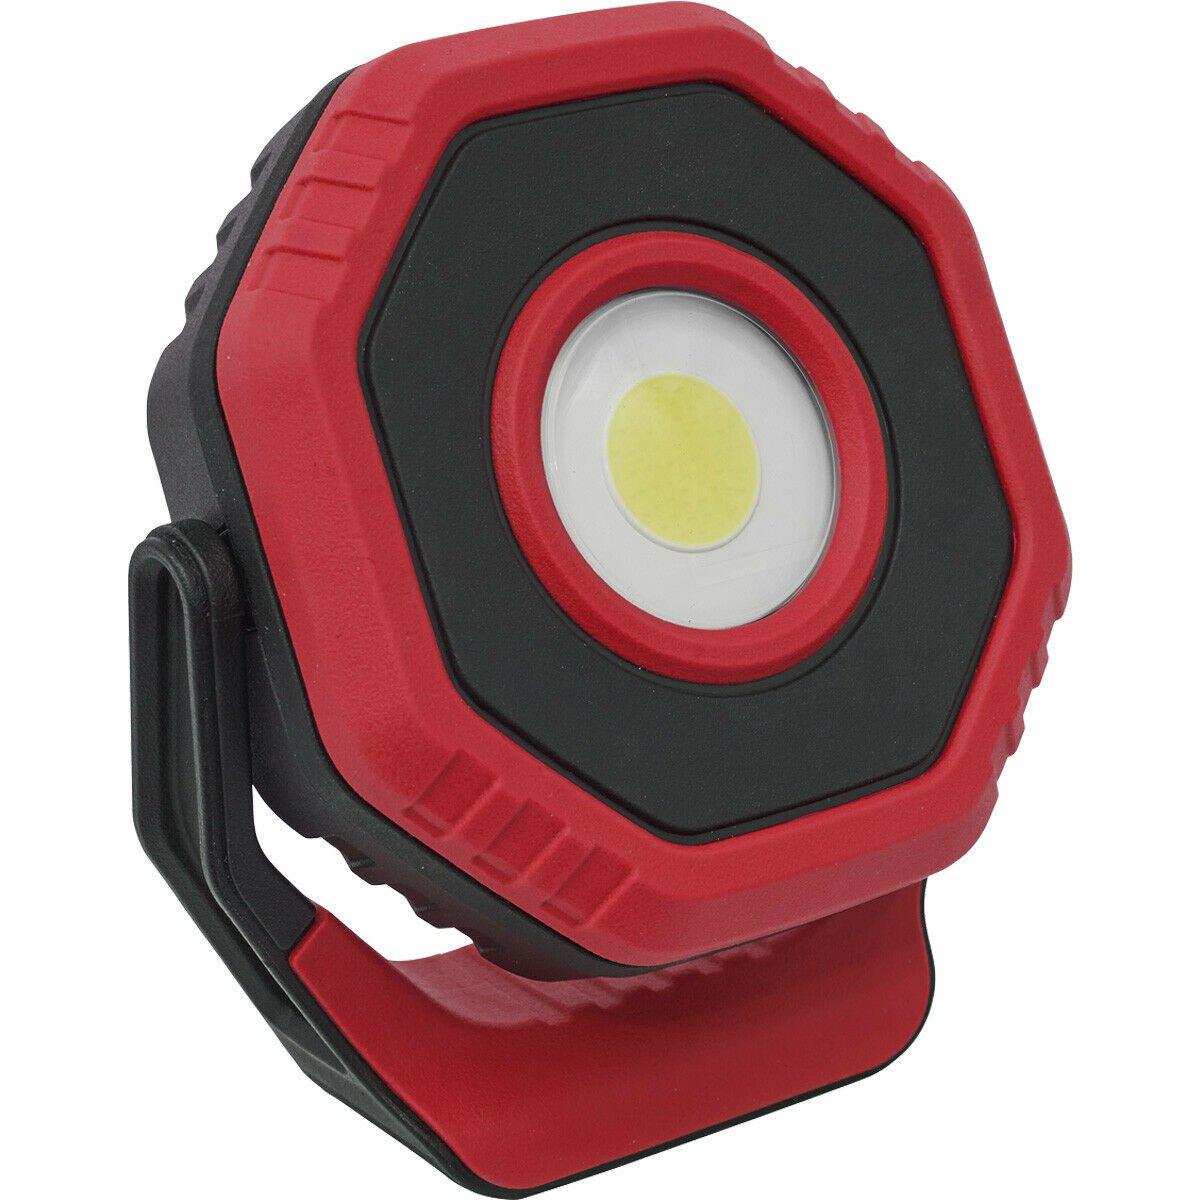 360A,Adeg Pocket Floodlight - 7W COB LED - Rechargeable - Magnetic Base - Red